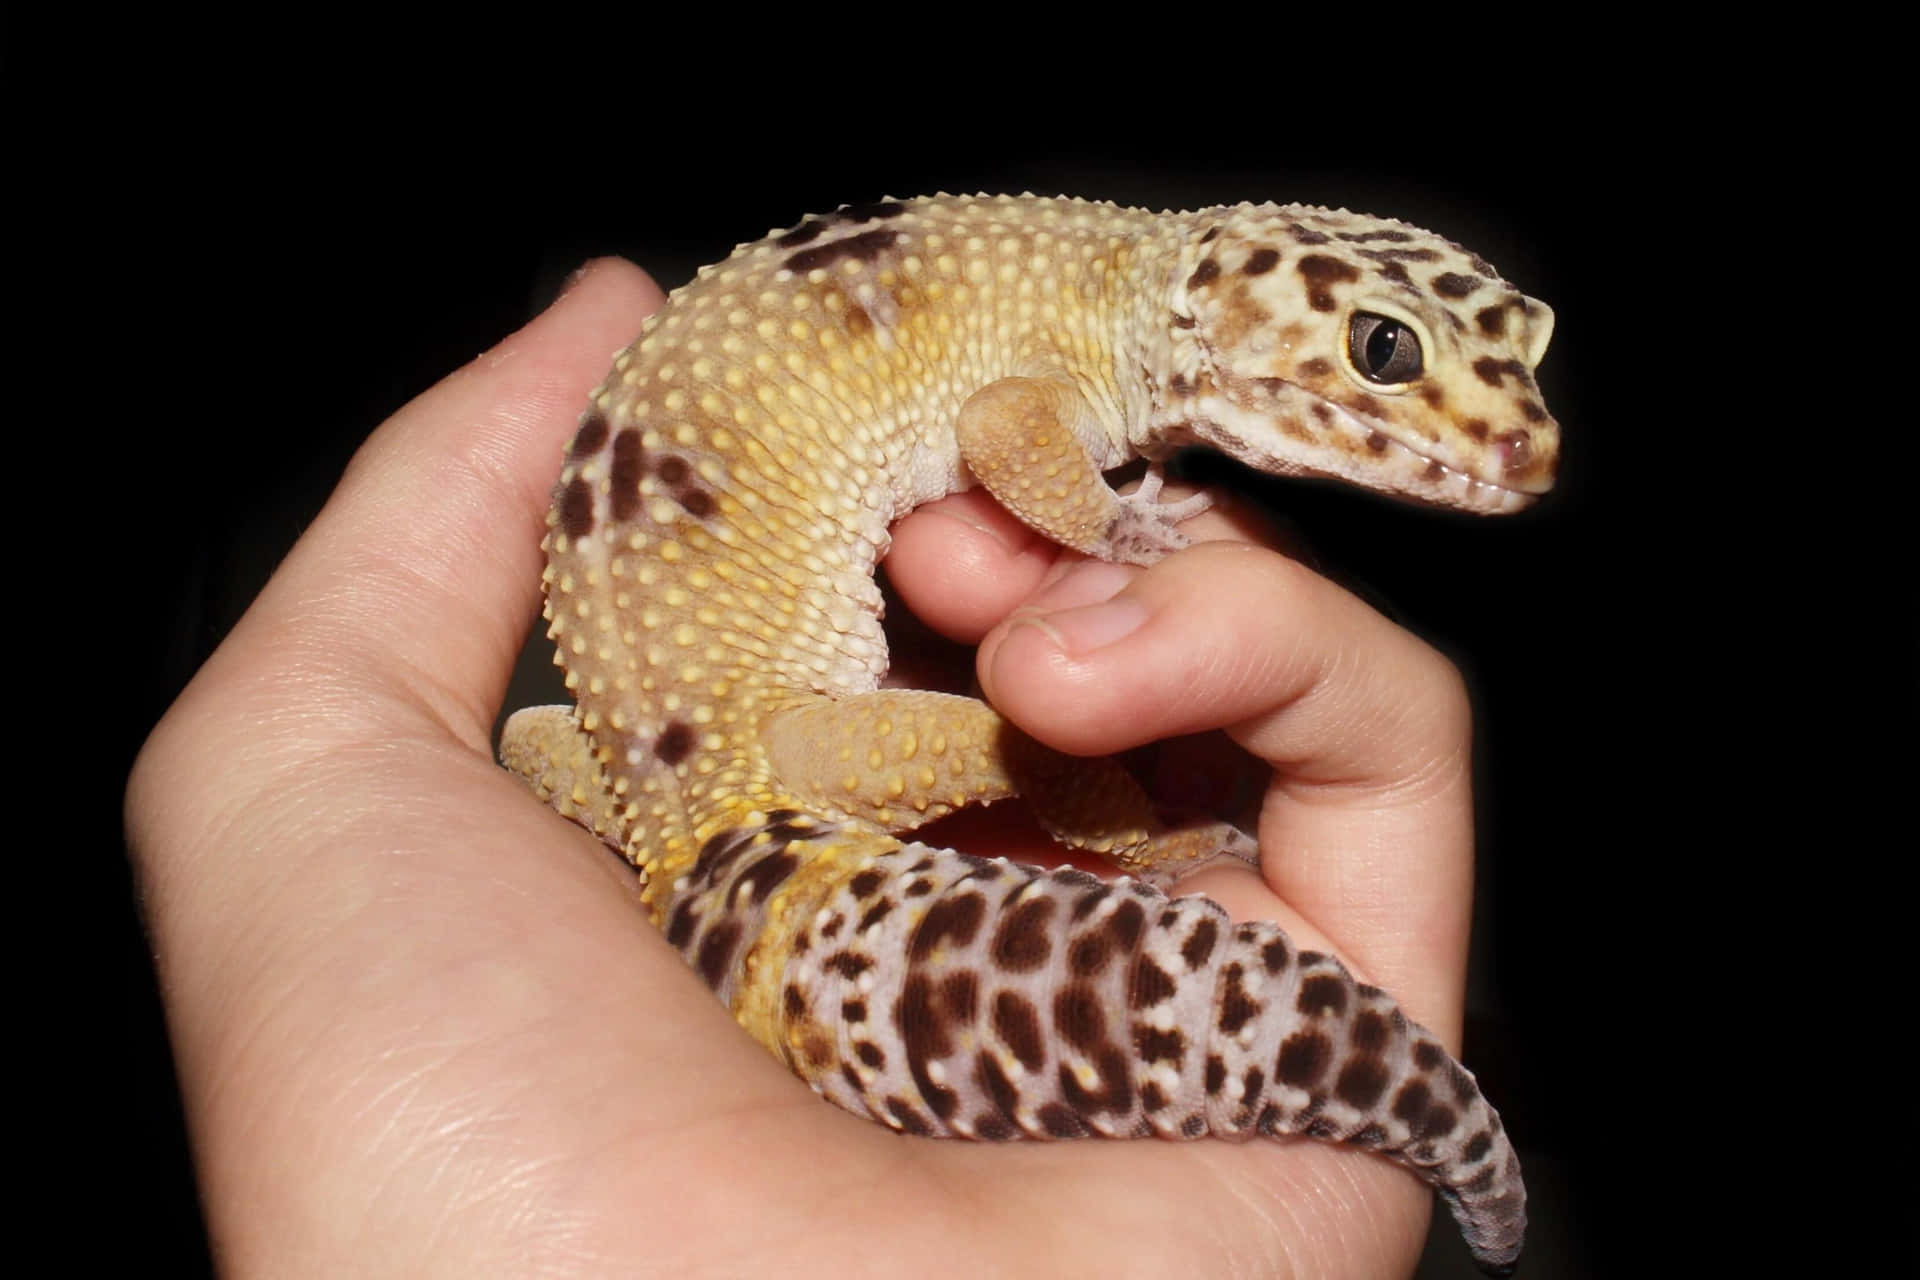 A Person Holding A Small Gecko On Their Hand